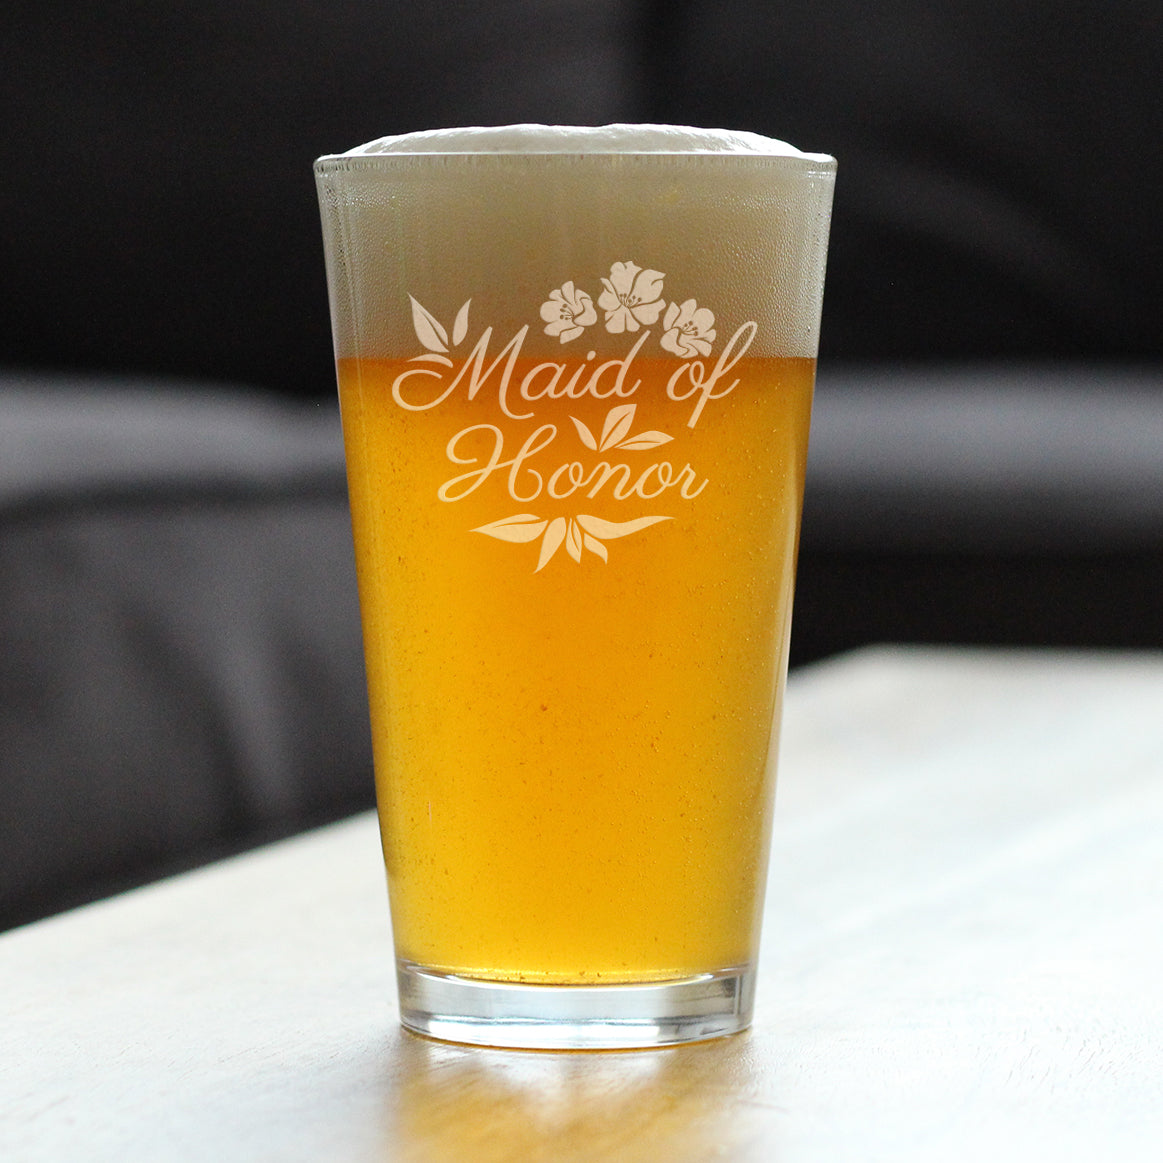 Maid of Honor Pint Glass - Maid of Honor Proposal Gifts - Unique Engraved Wedding Cup Gift